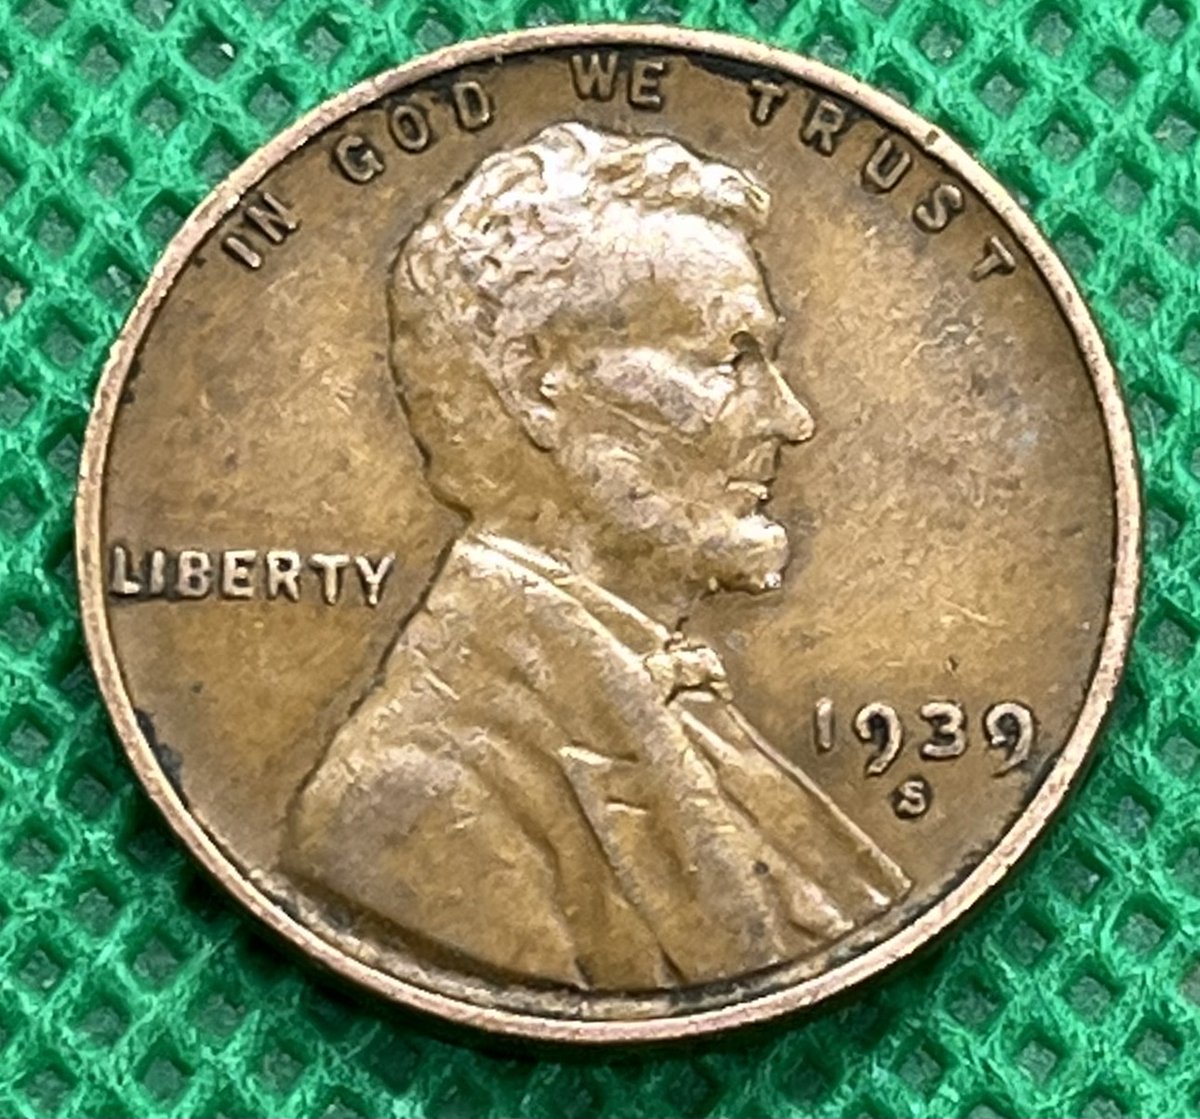 I found wheat pennies from five decades in the same box. This 1939S looks better than the previous 1947D.